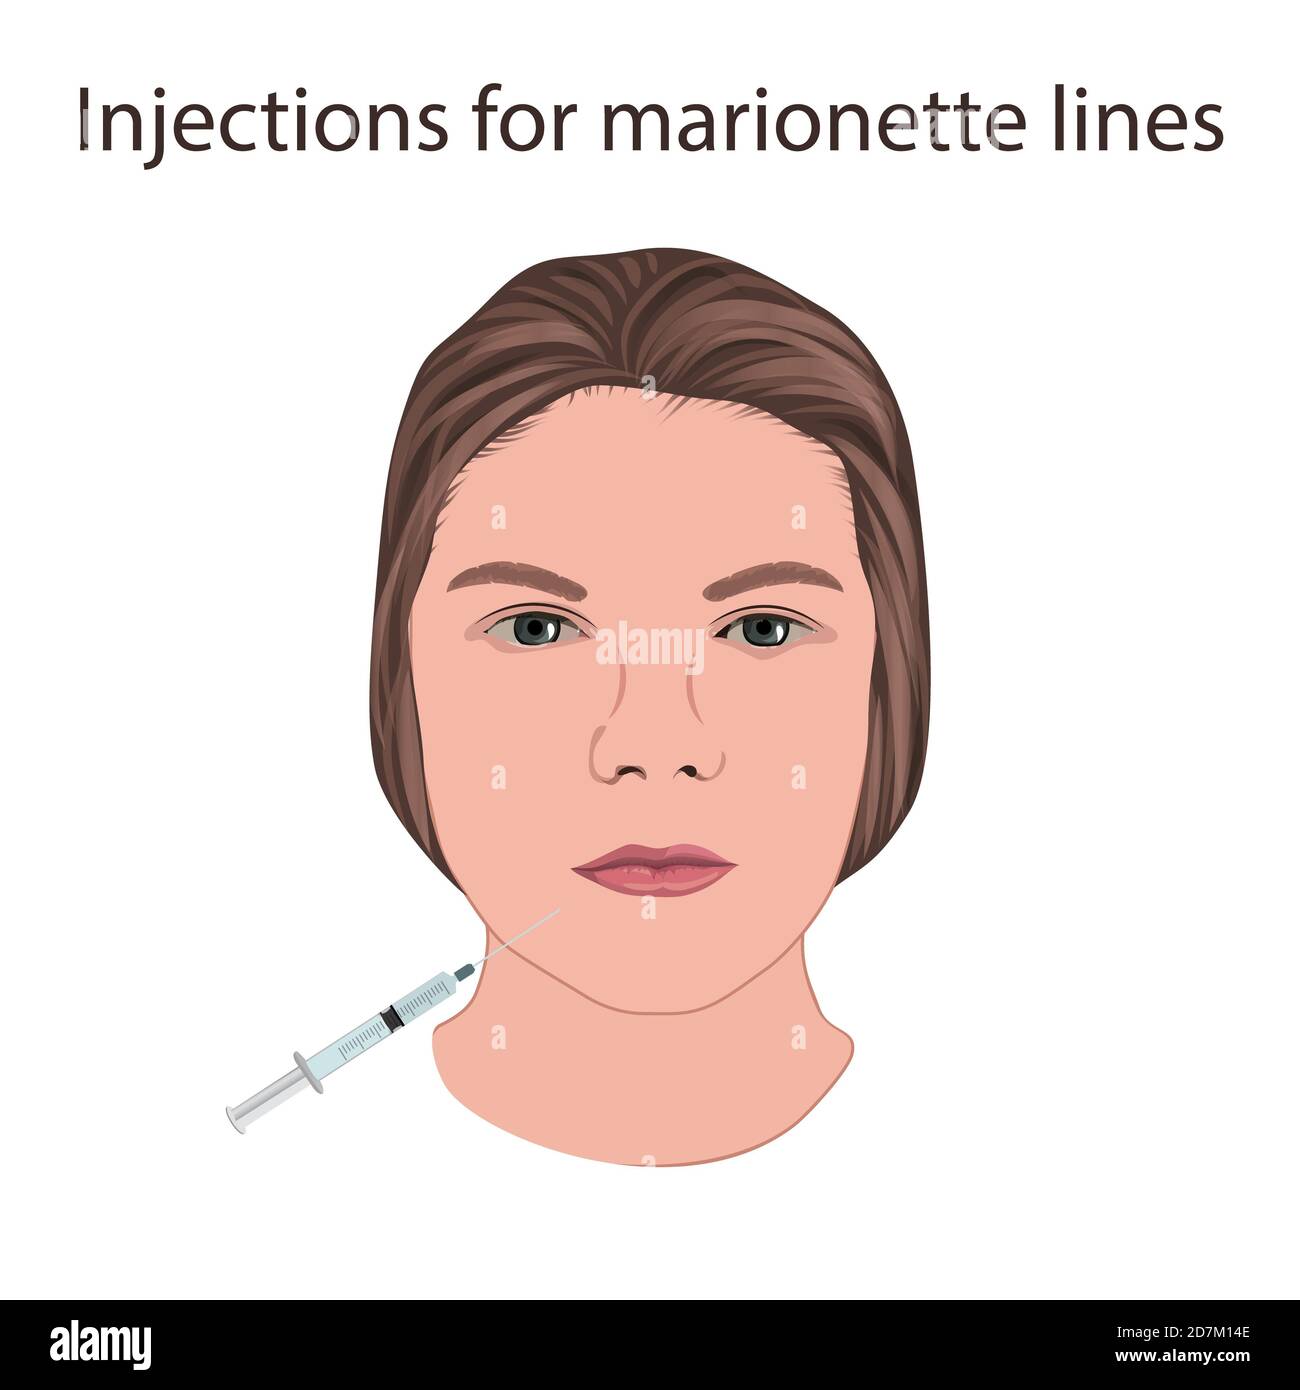 Injections for marionette lines, illustration. Stock Photo